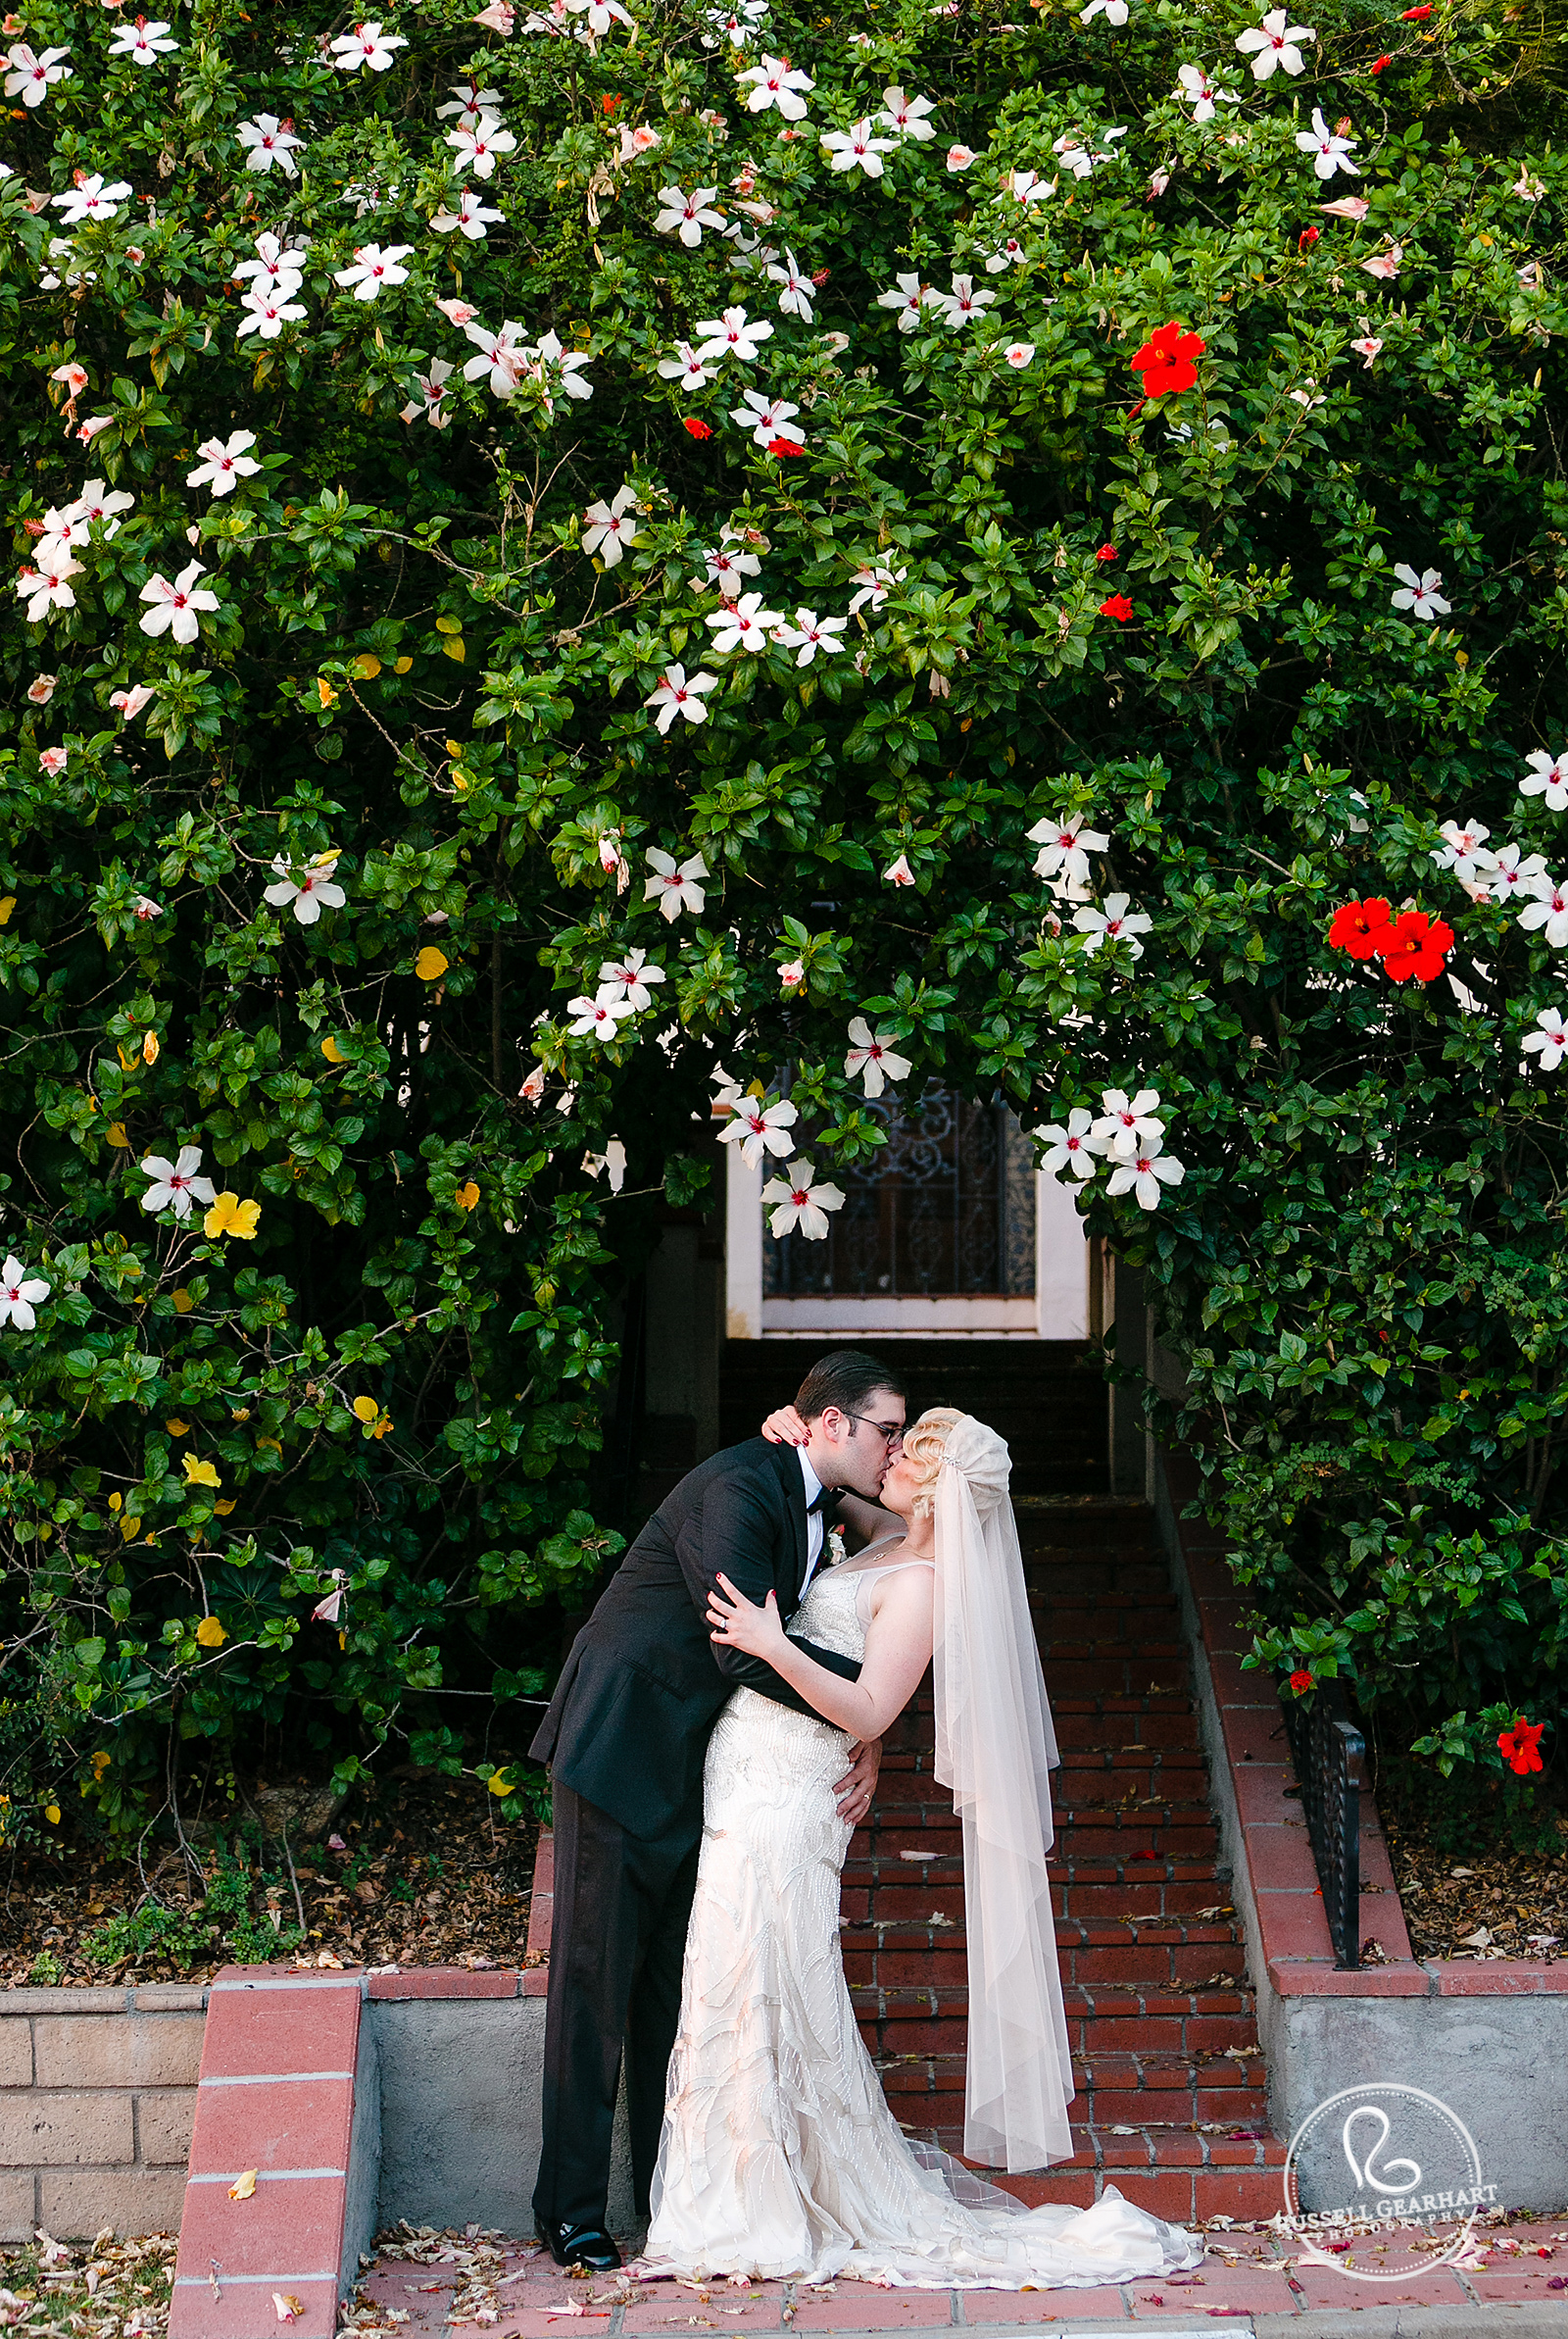 Bridal Portrait on Steps Surrounded by Hibiscus - Roaring Twenties Wedding – Russell Gearhart Photography – www.gearhartphoto.com